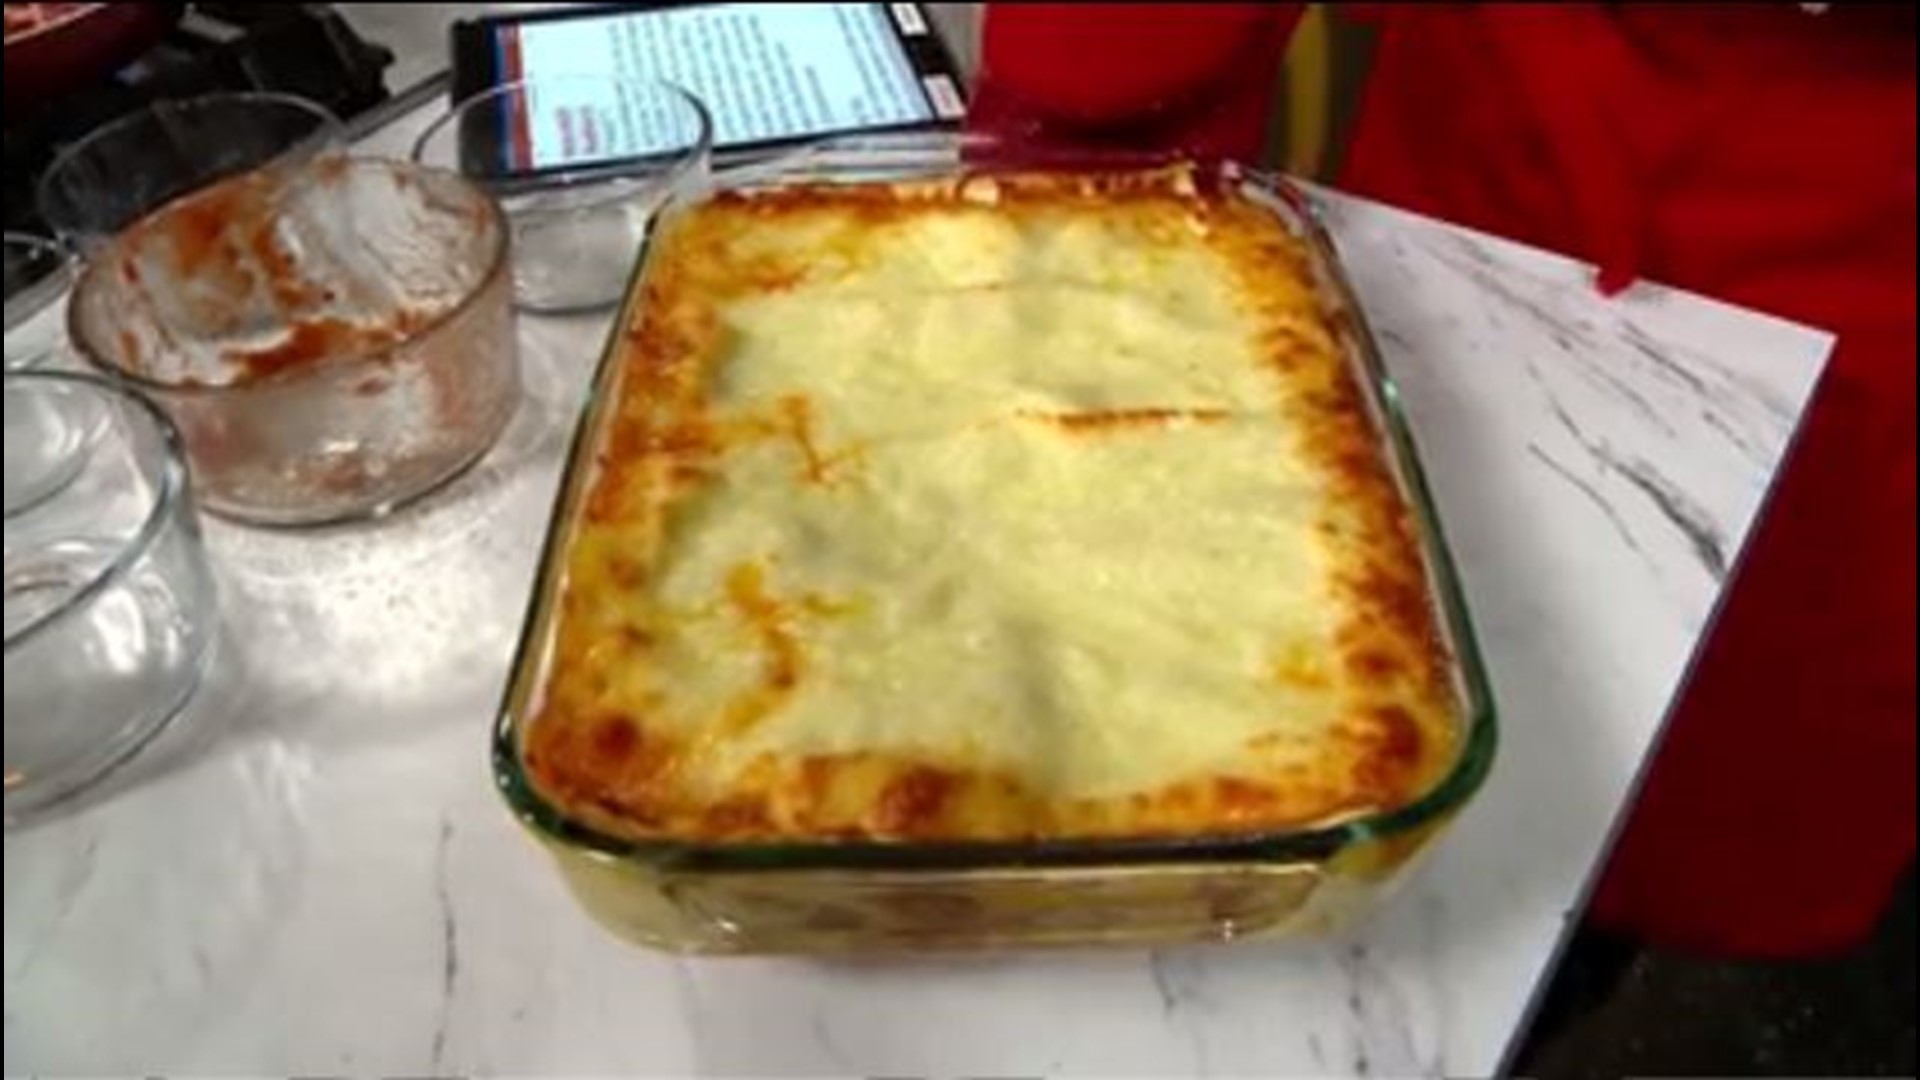 WHAS11 staffer Luchian Deurell stopped by the GDL kitchen to whip up a classic dish, but with a twist!